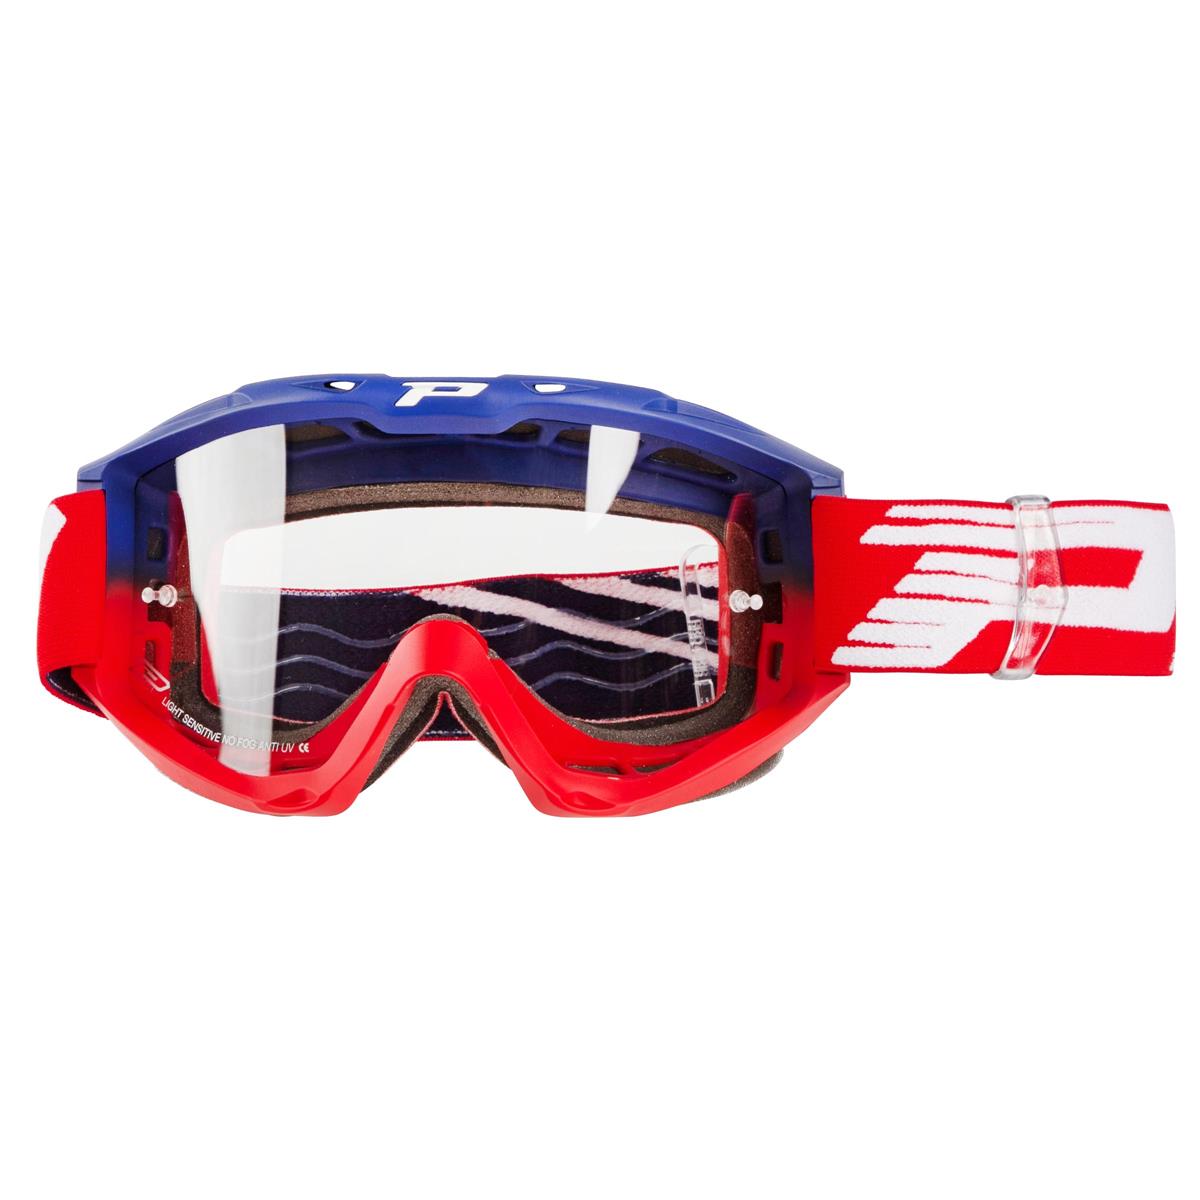 ProGrip Goggle 3450 LS Riot Blue/Red